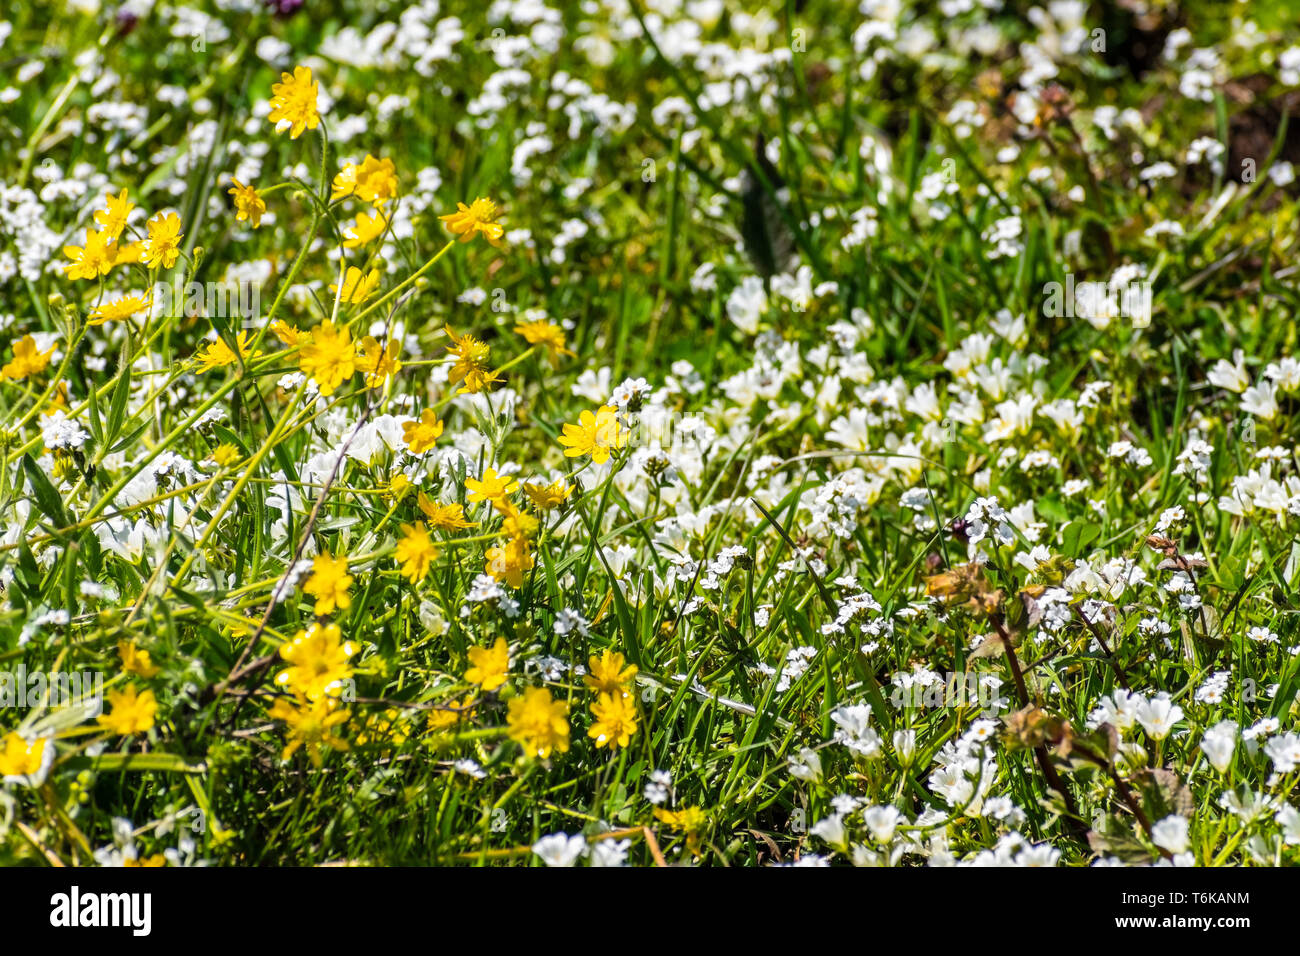 California Buttercup (Ranunculus californicus), White meadowfoam (Limnanthes alba) and Popcorn (Plagiobothrys nothofulvus) growing on a meadow, North  Stock Photo